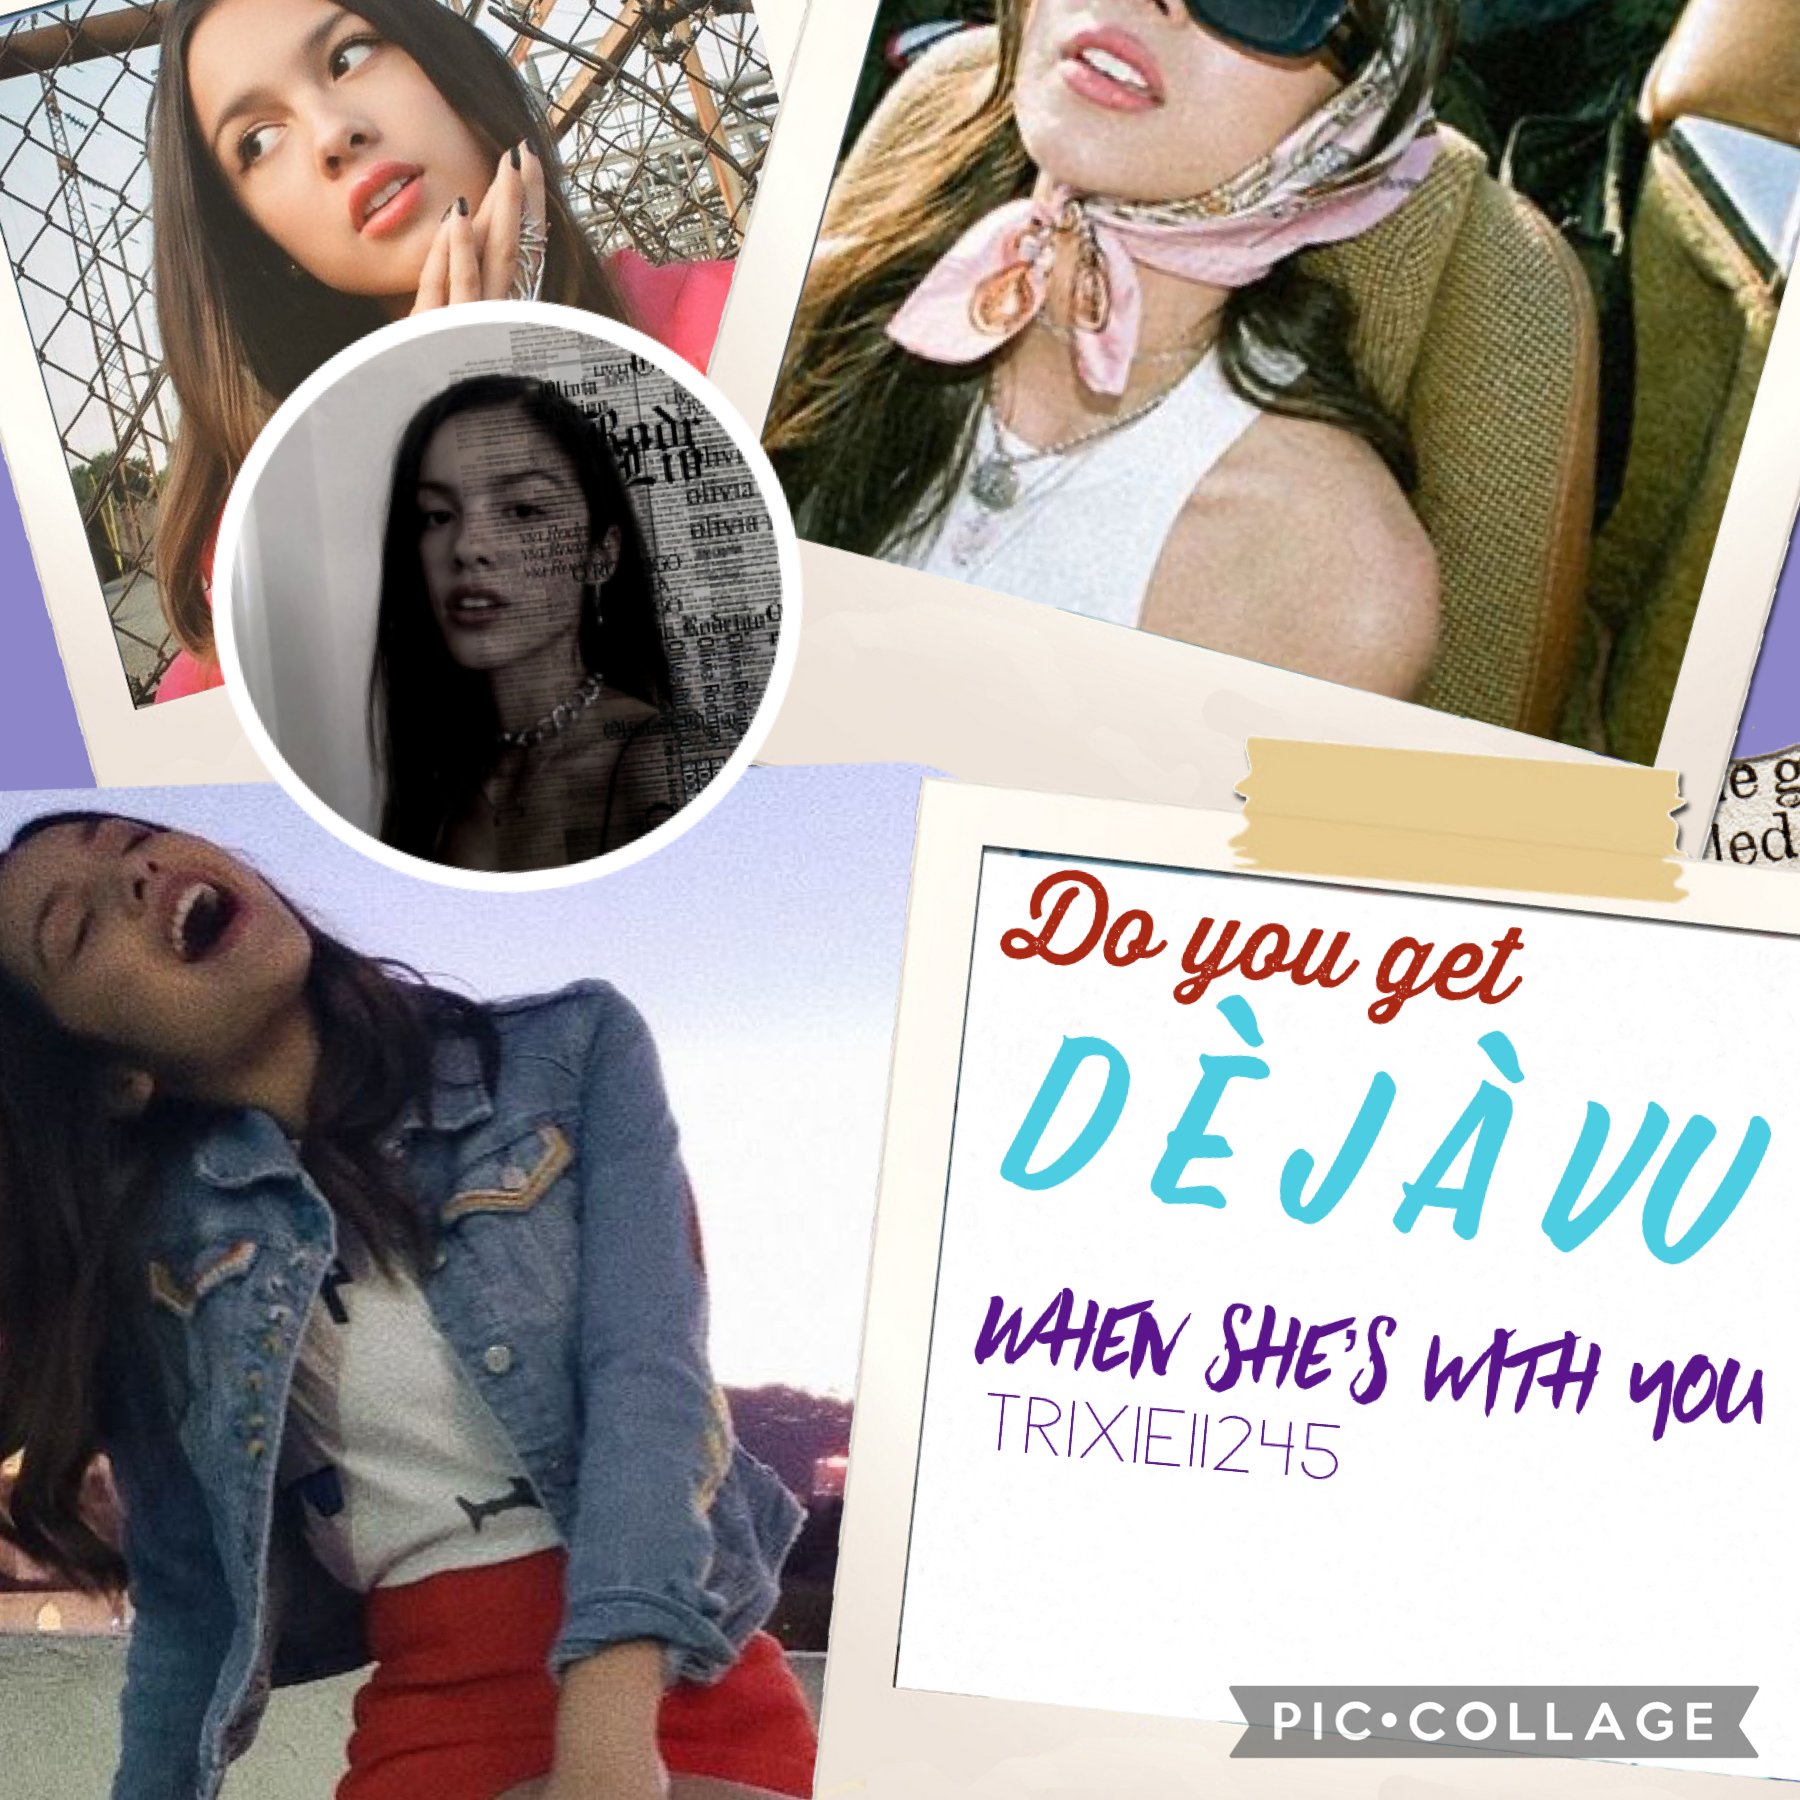 🎤tap🎤 
 Yeahhhh Olivia rodrigo (did I spell that right?) HAS A NEW SONG AND I LOVE IT!!❤️ go listen to it it’s called deja vu